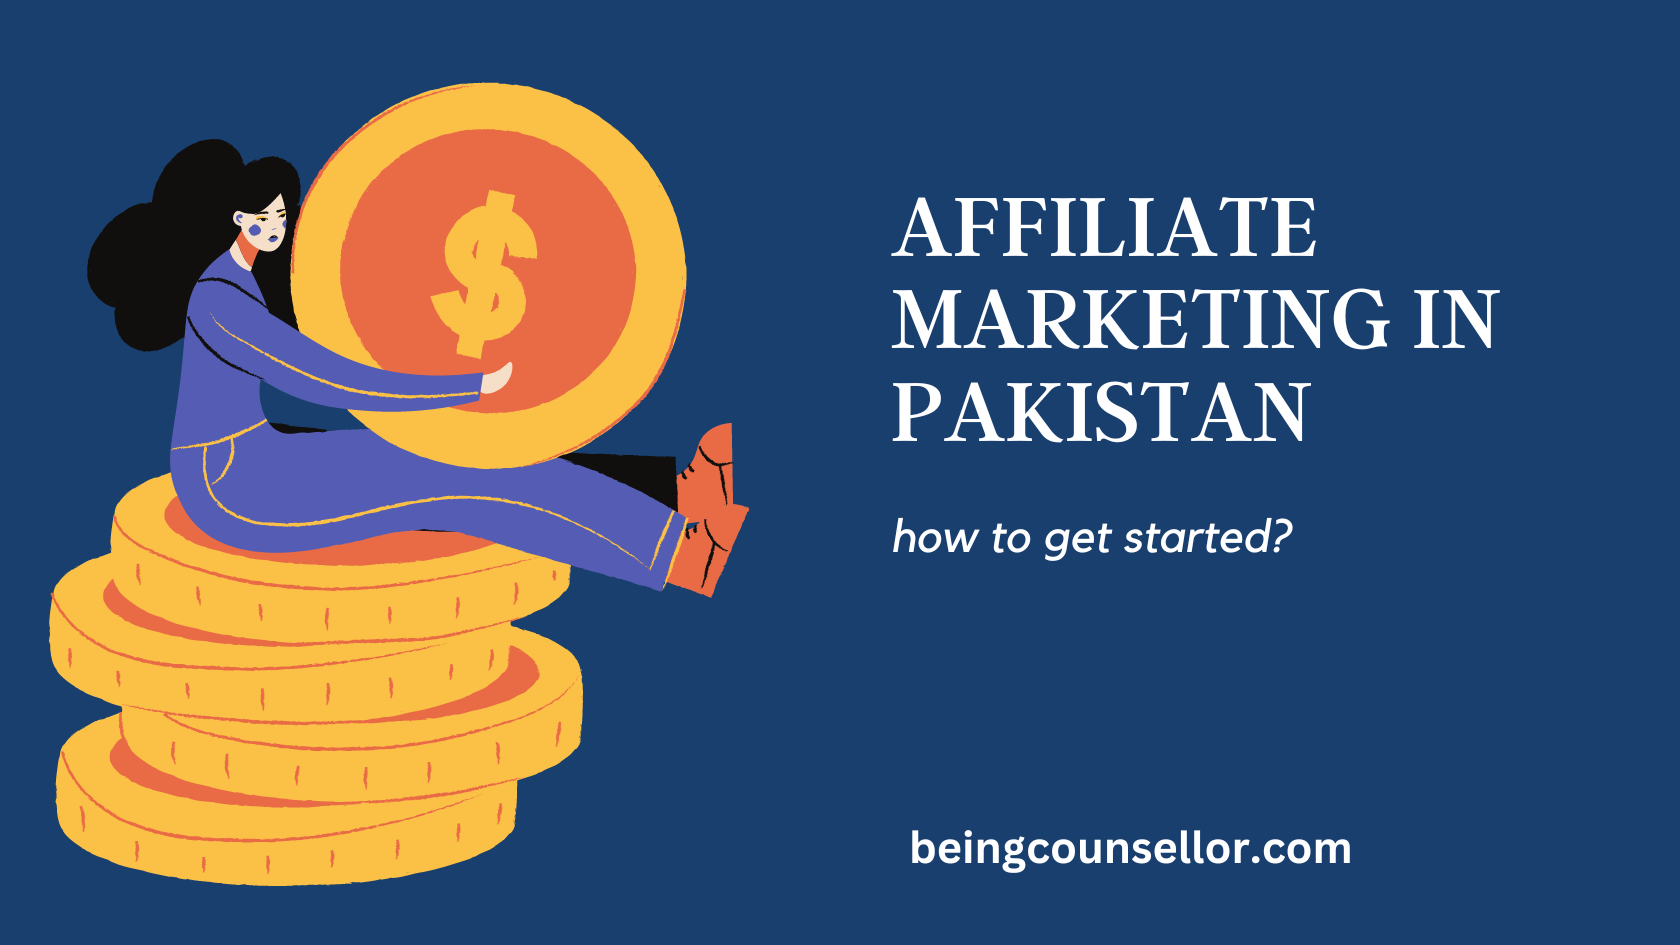 What Is Affiliate Marketing in Pakistan